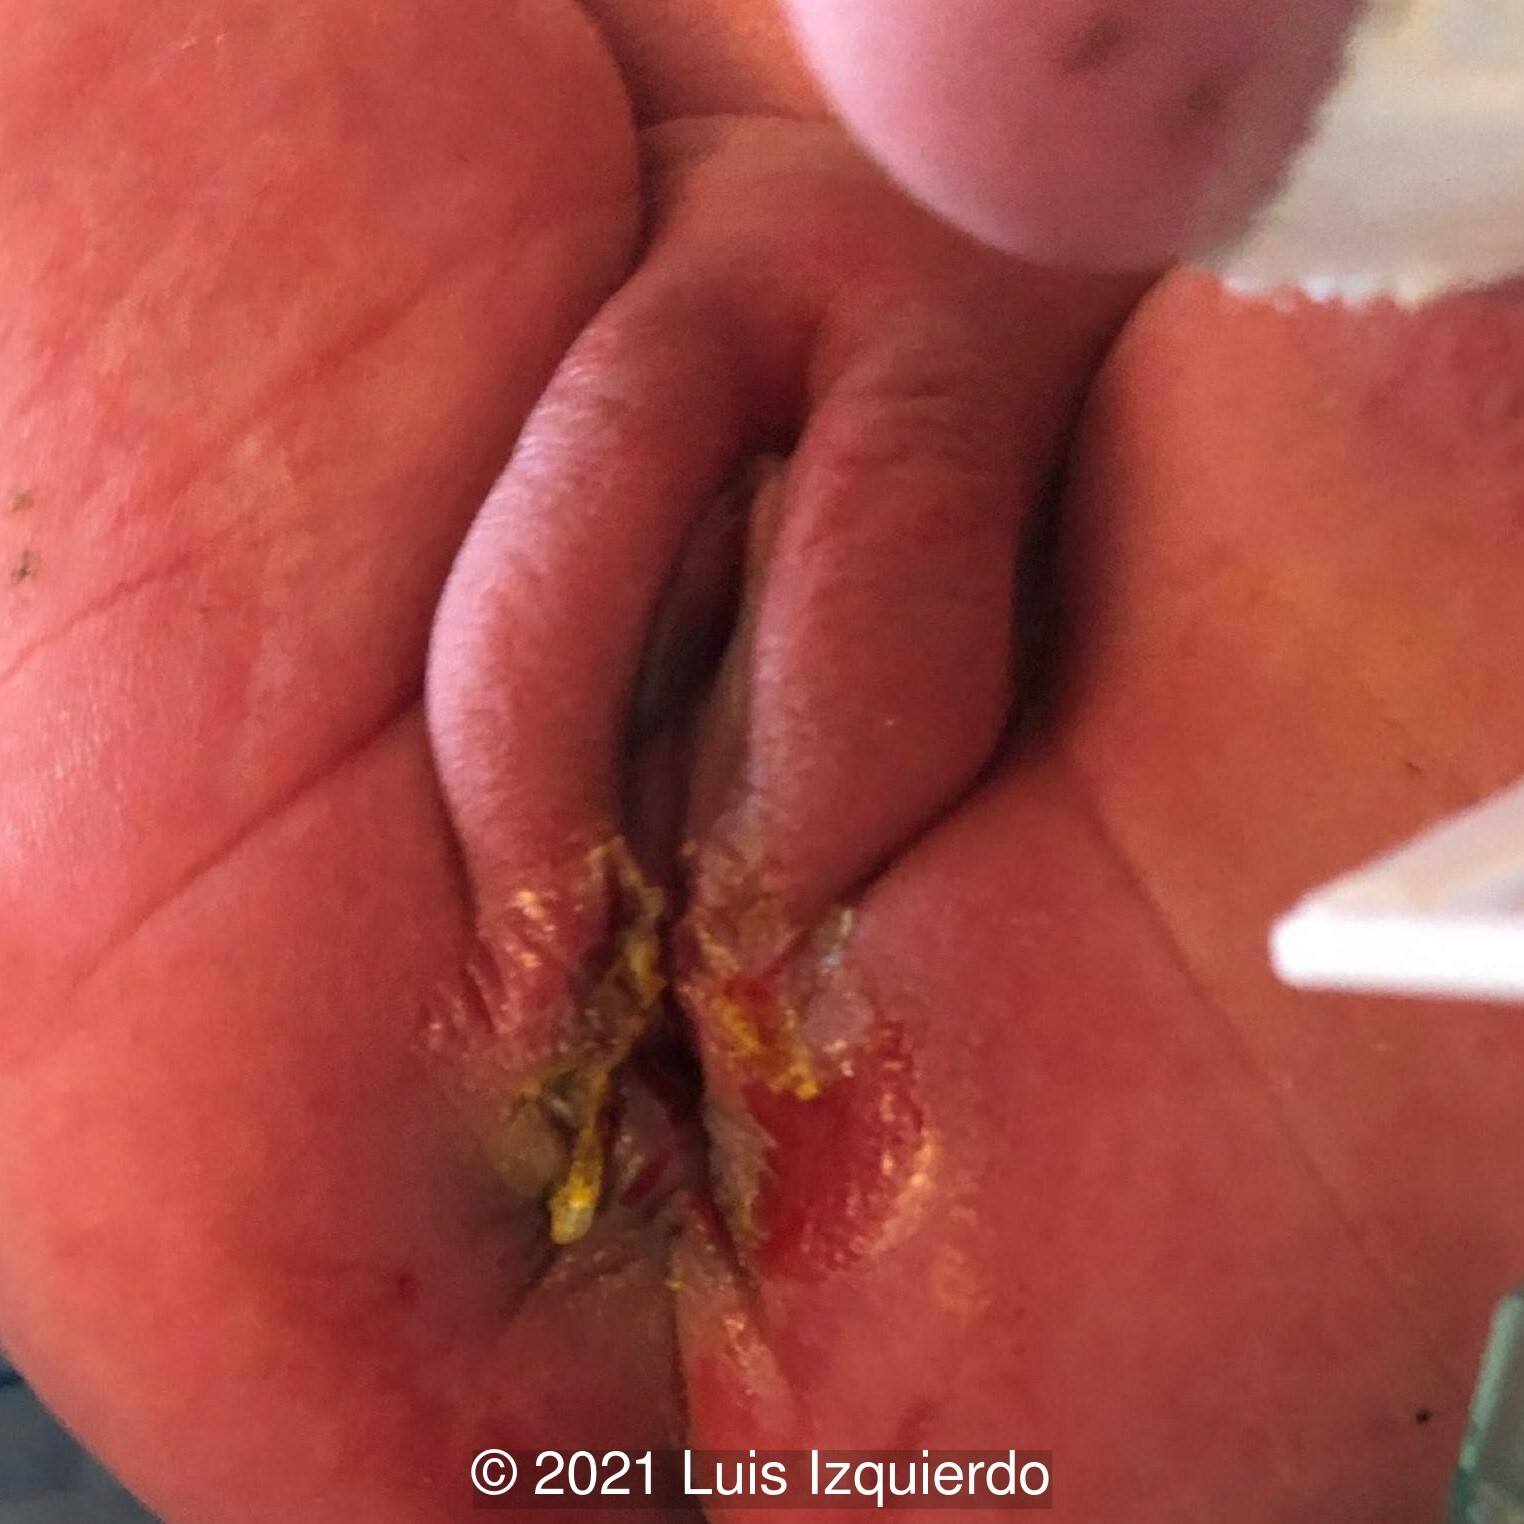 Post-operative image after resection of the perineal mass. Note the normal femal genitalia.